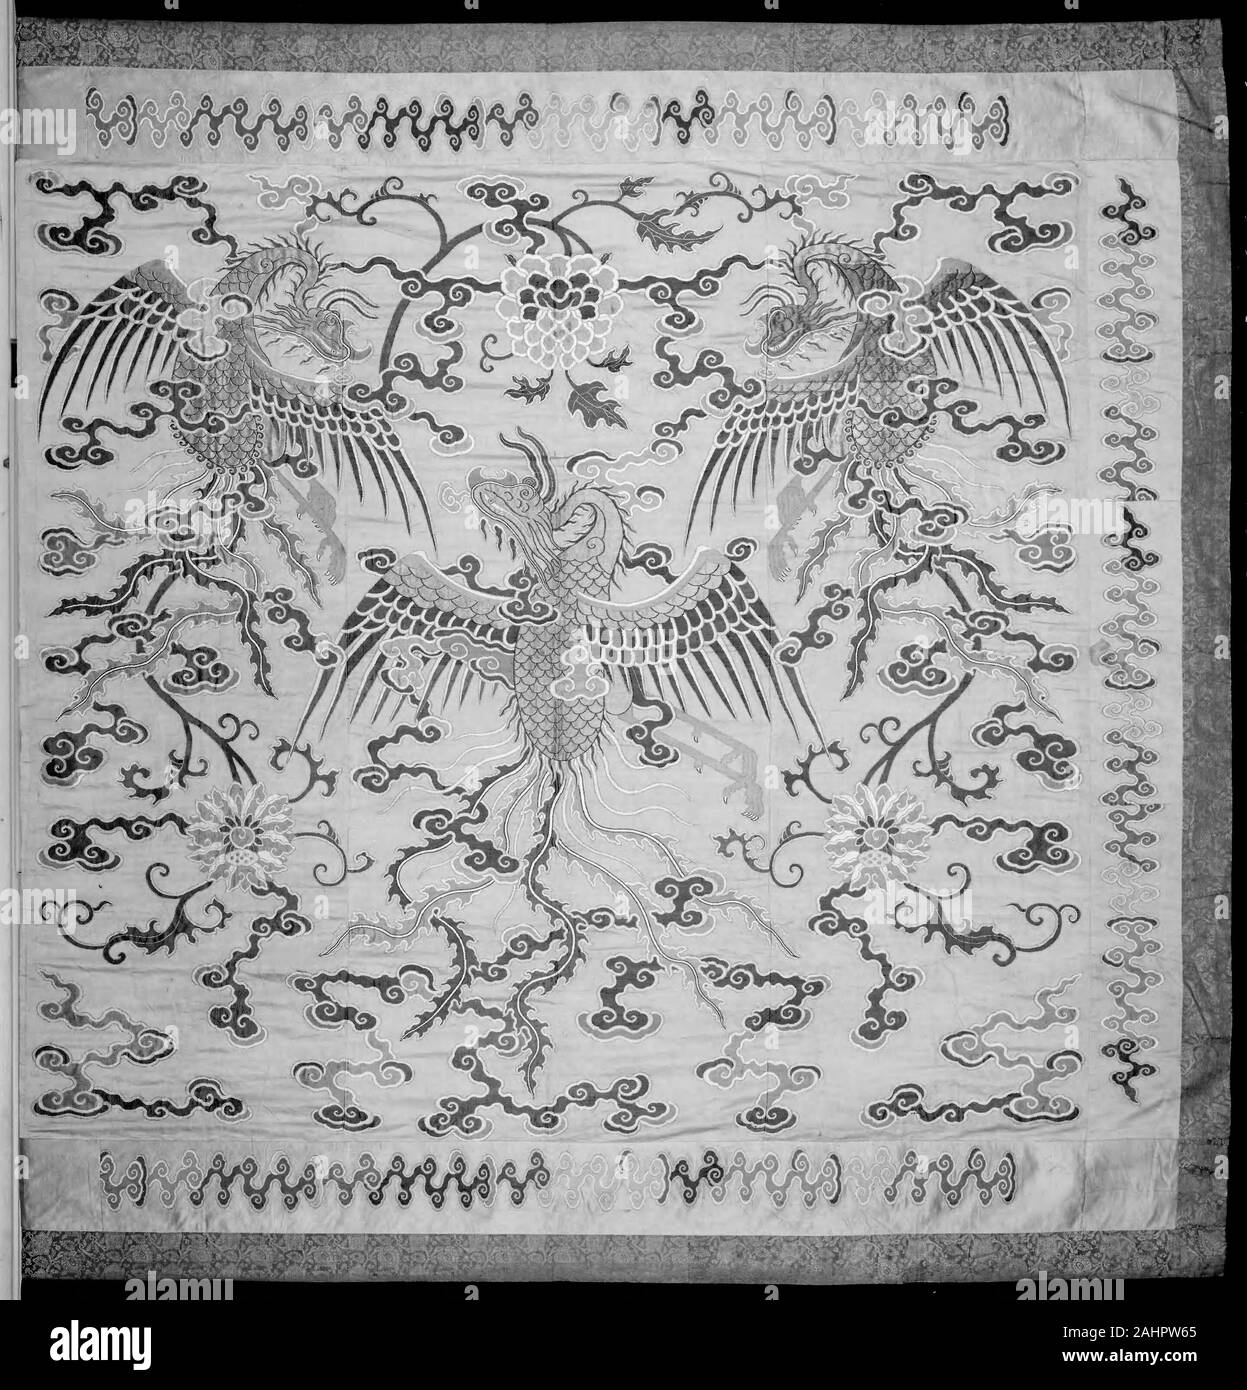 Manchu. Bed Curtain. 1650–1750. China. center panel and inner borders silk, gold-leaf-over-lacquered-paper strips, and gold-leaf-over-lacquered-paper-strip-wrapped silk, warp-float faced 7 1 satin weave with supplementary brocading wefts bound in weft-float faced 1 3 'S' twill interlacings; outer border silk, warp-float faced 5 1 twill weave with weft-float faced 1 2 'Z' twill interlacings of secondary binding warps and supplementary patterning wefts; lined with cotton, plain weave Stock Photo